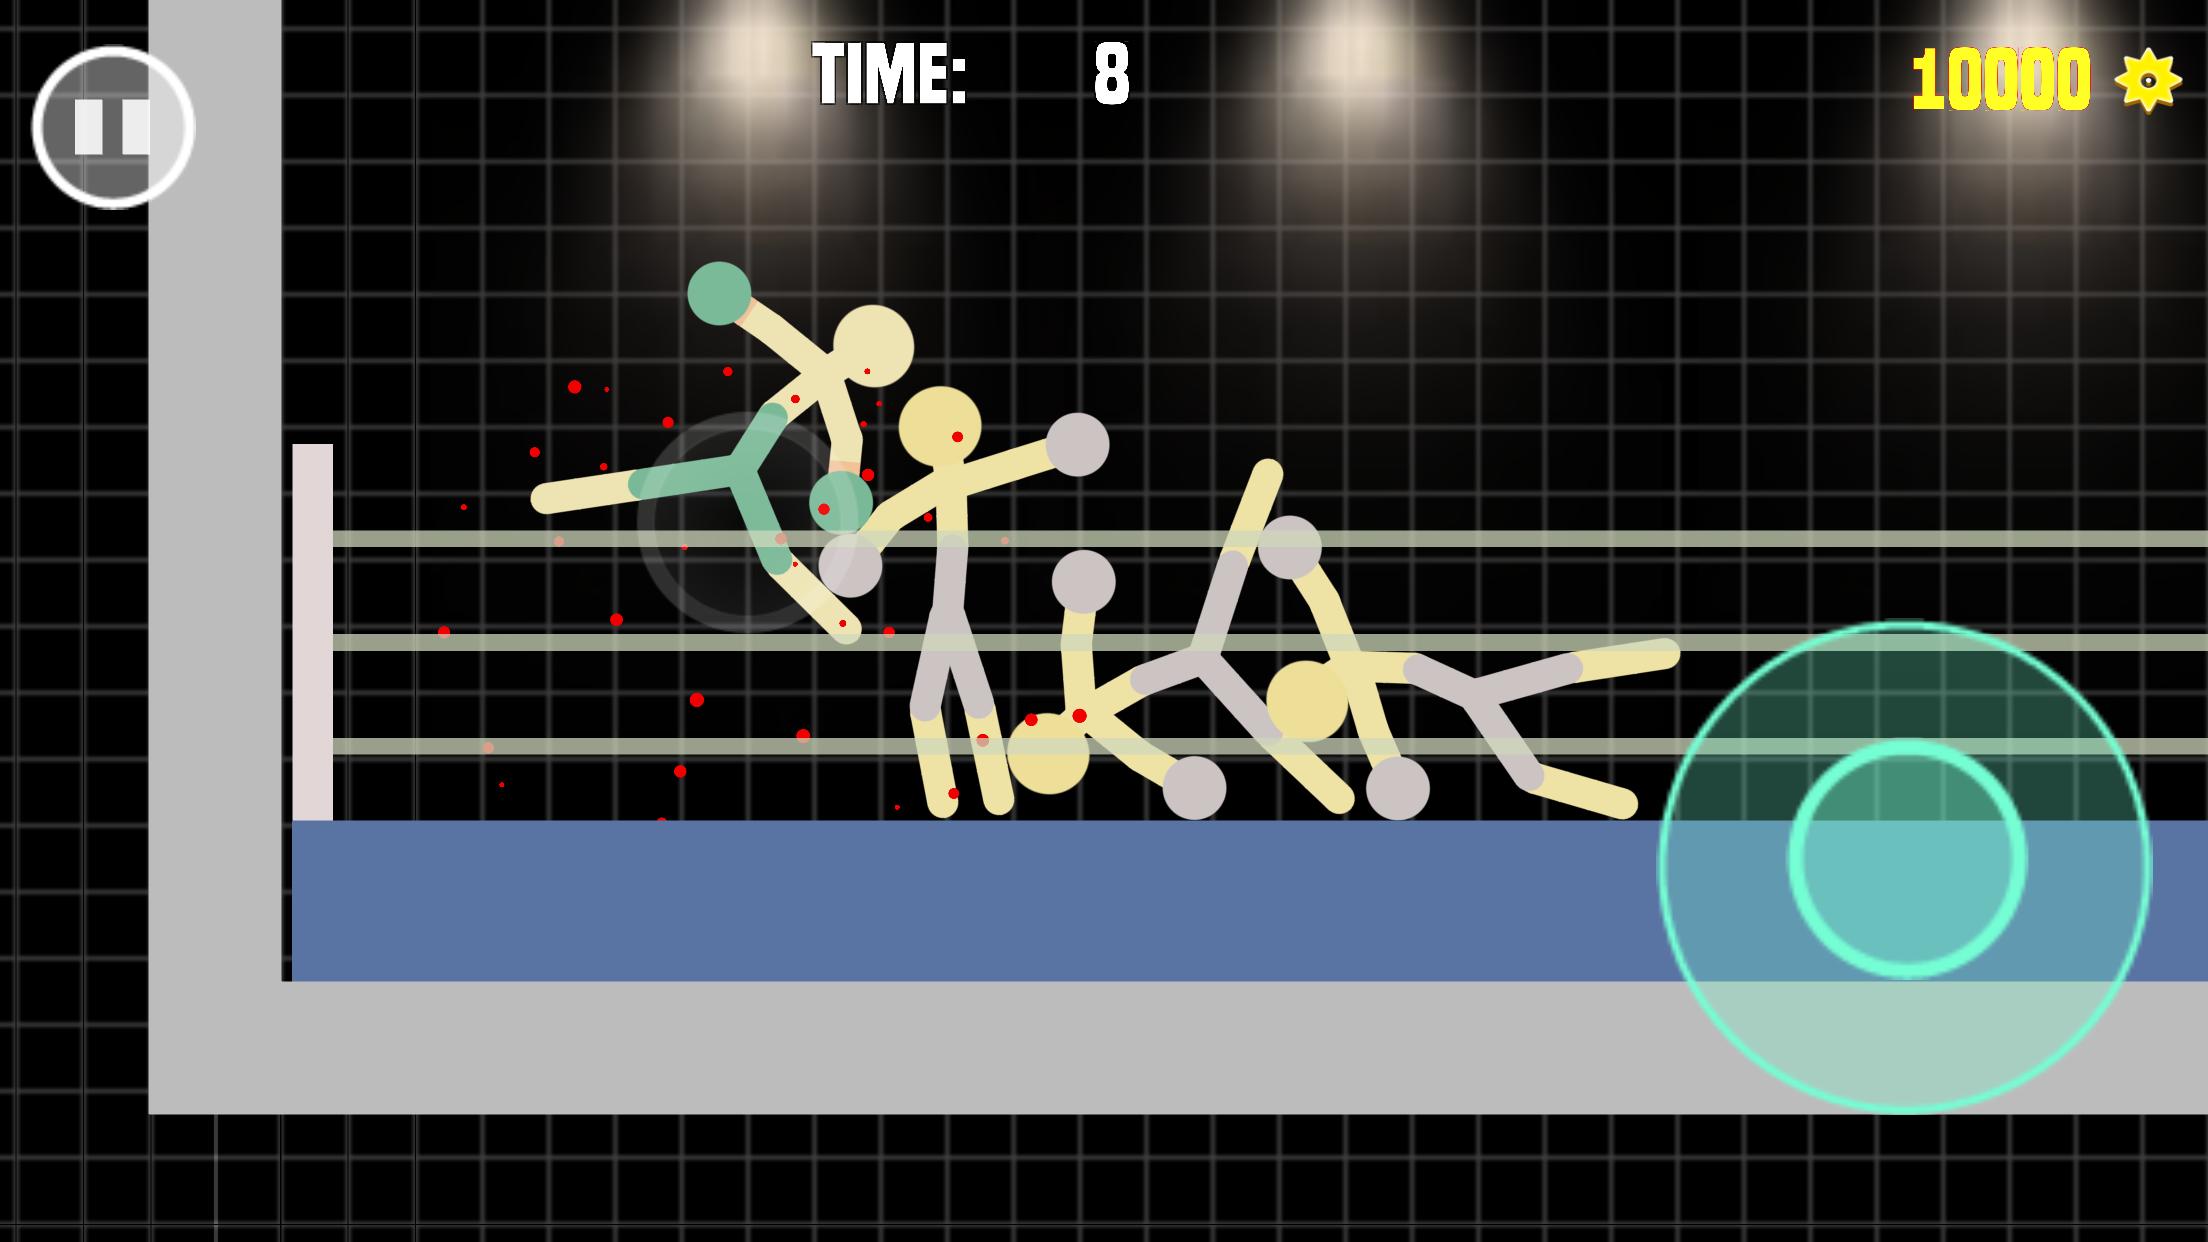 Download Stickman Fight android on PC